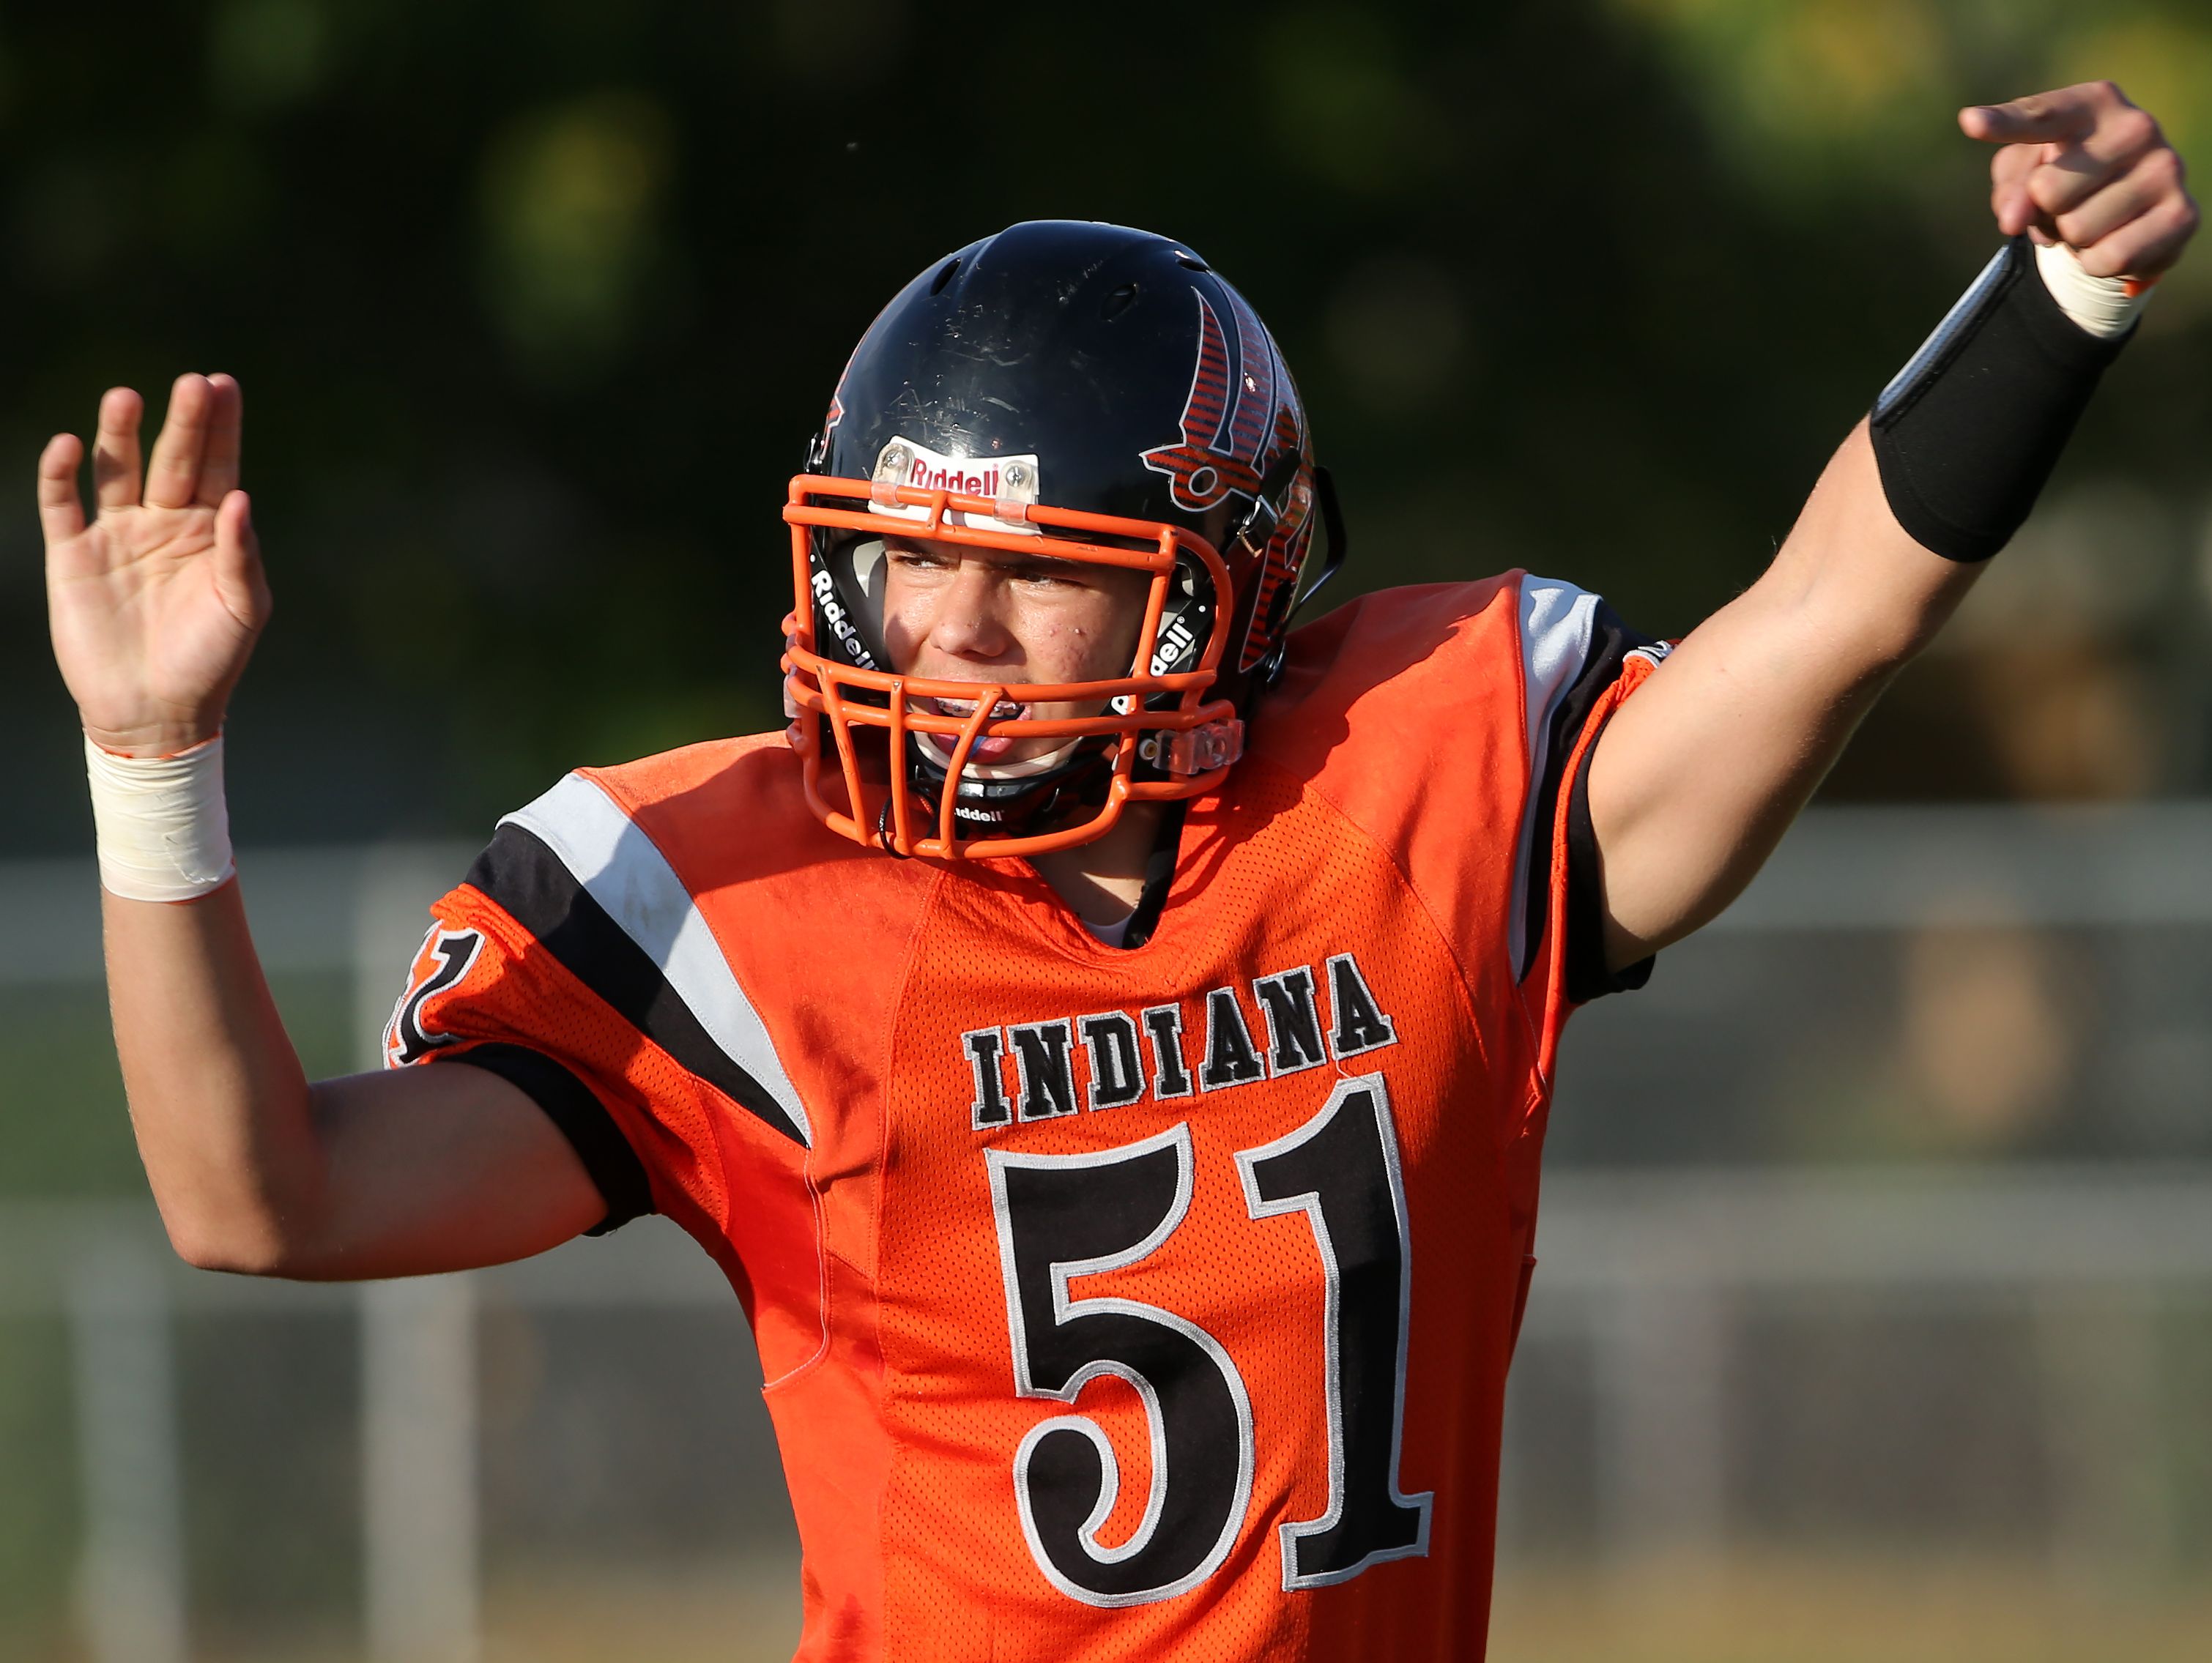 Indiana School for the Deaf linebacker Lance Wood calls out a play against Traders Point Christian Academy, on Friday, August 22, 2014, the opening night of high school football in Indianapolis.